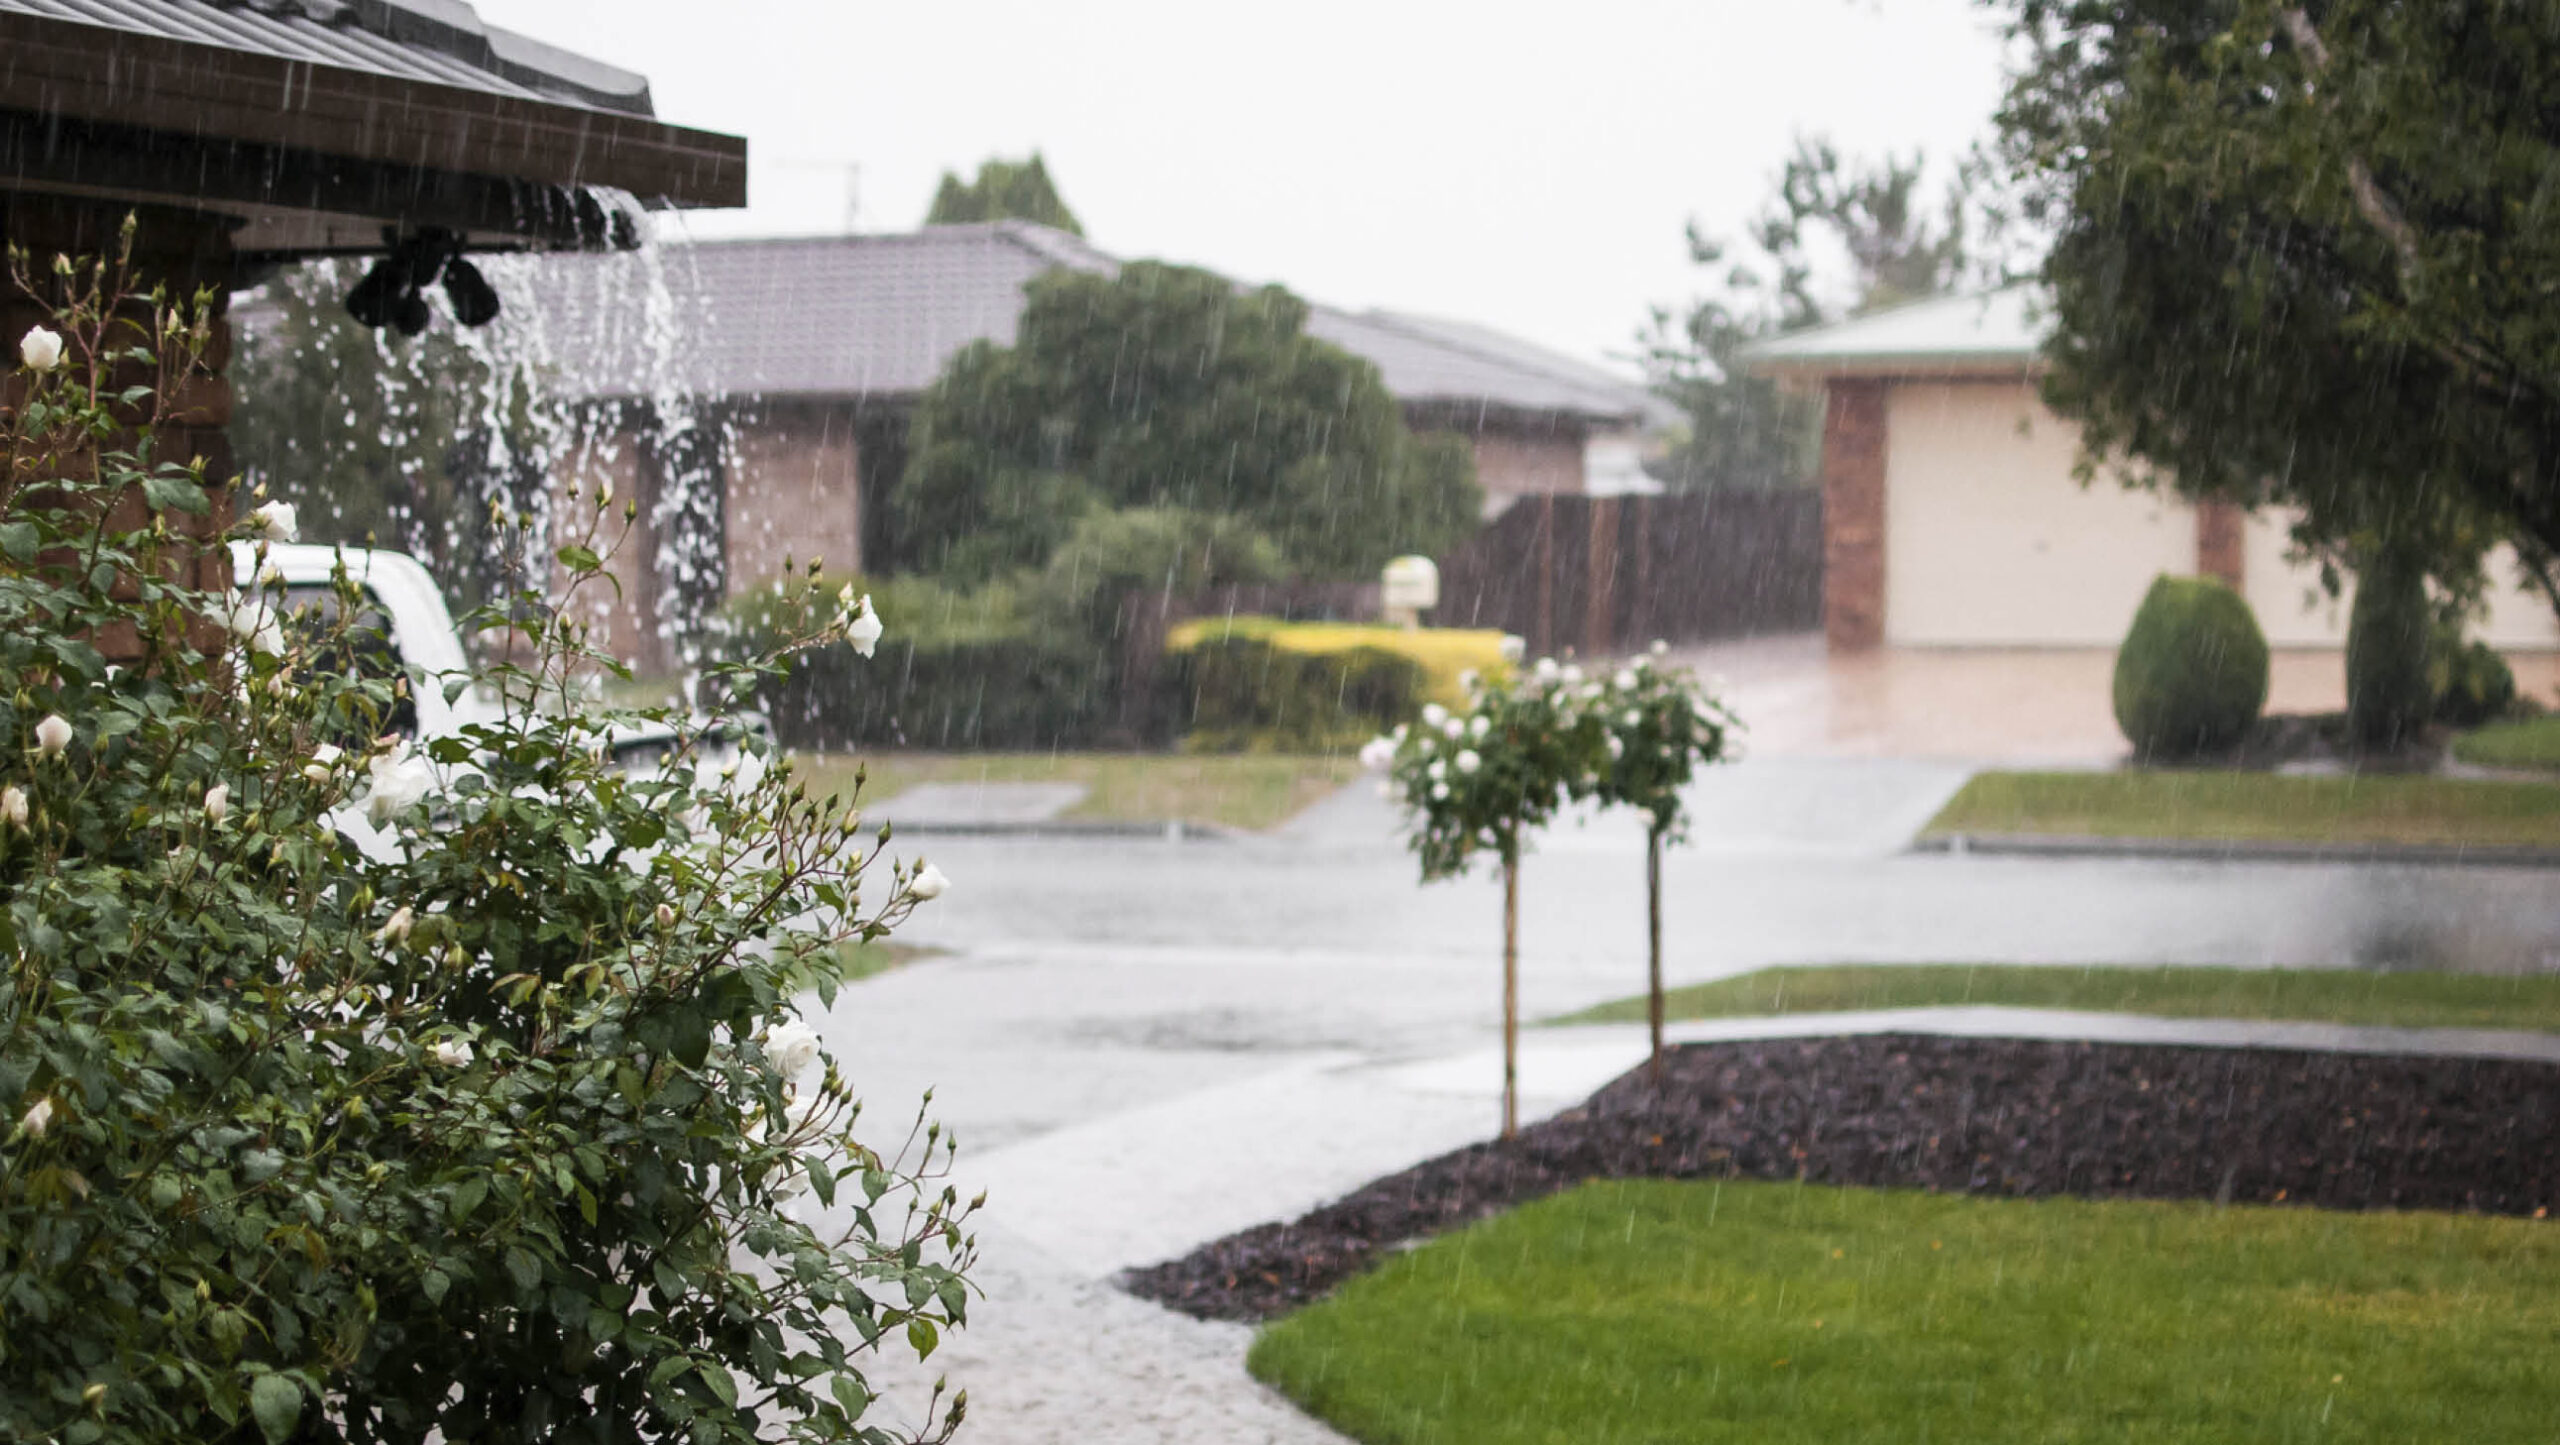 Ensure run off from gutters flows into garden beds or water tanks.